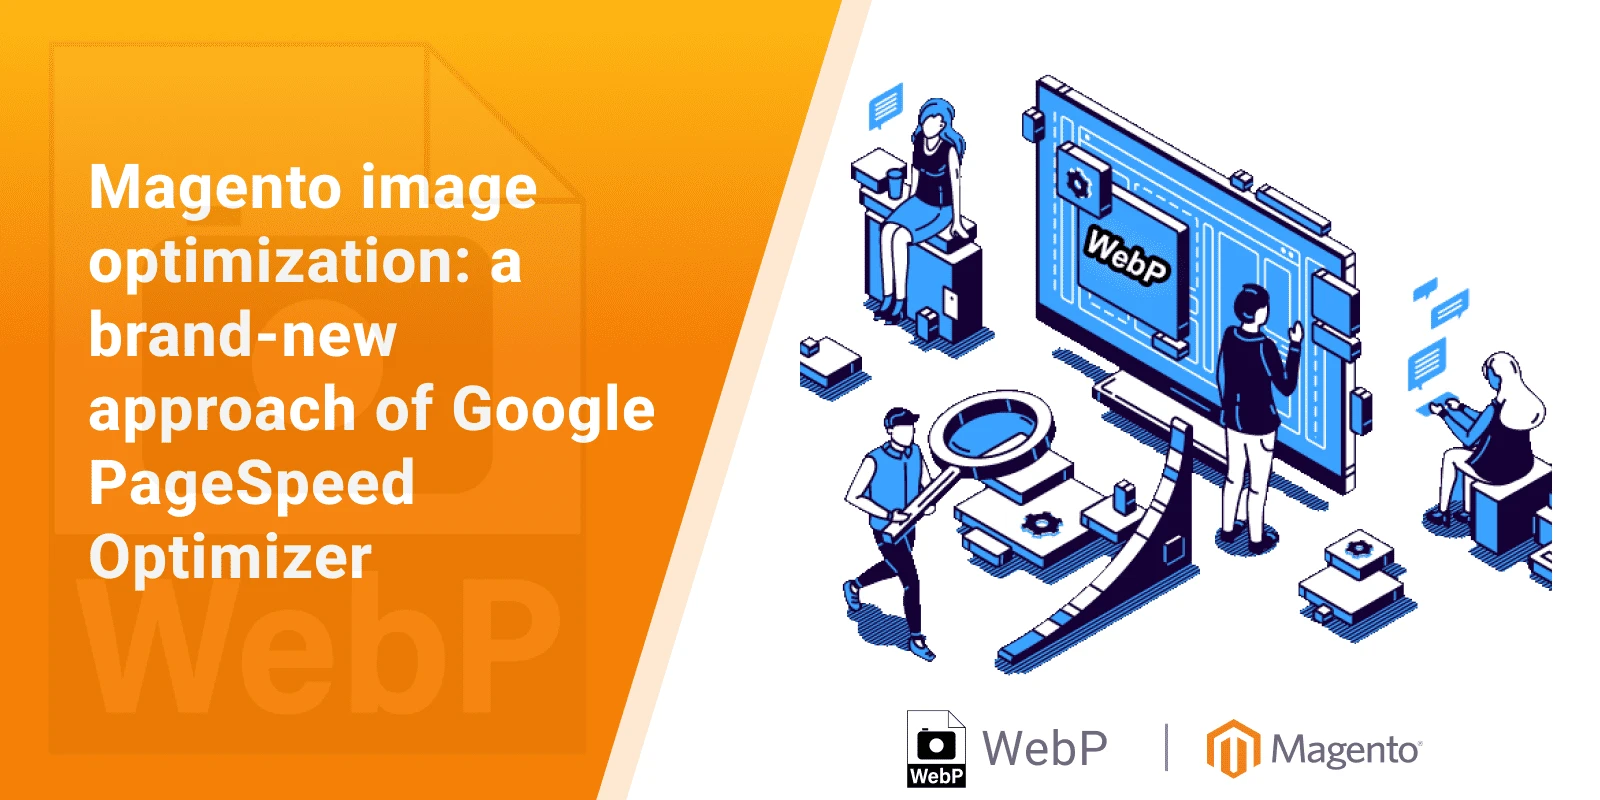 Magento image optimization: a brand-new approach of Google PageSpeed Optimizer